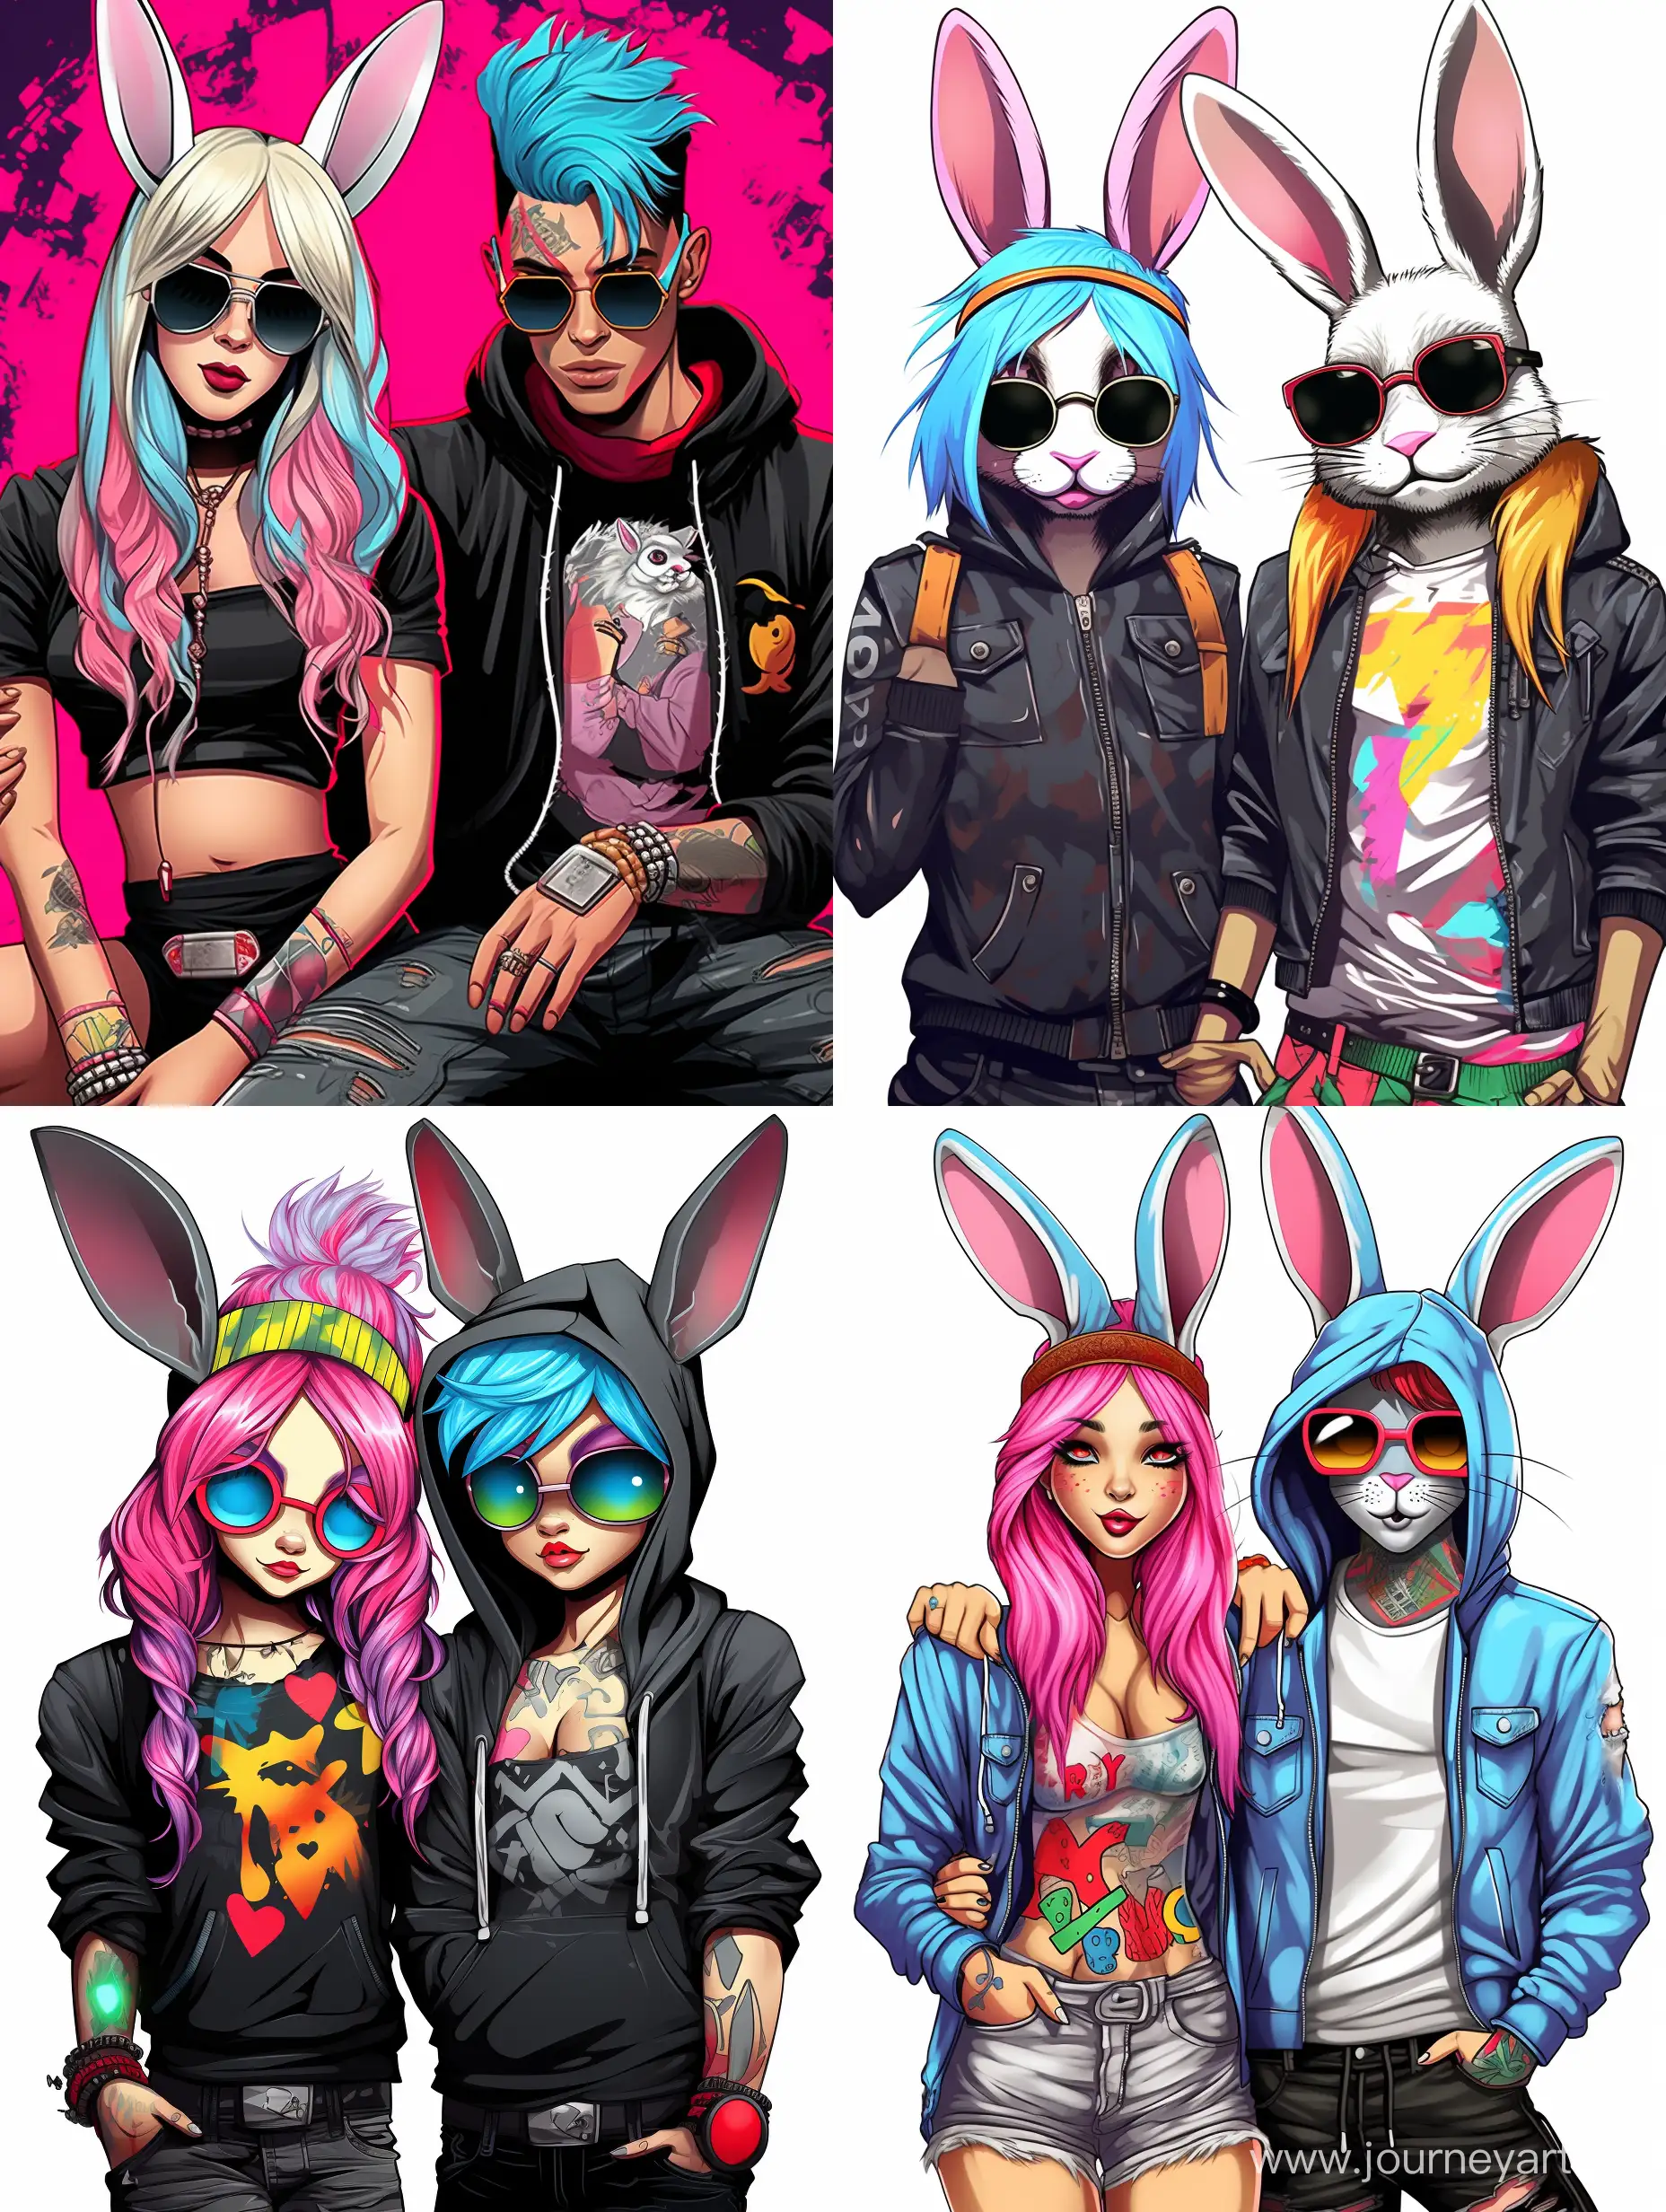 Trendy-Rabbits-with-RainbowColored-Hair-in-HipHop-Fashion